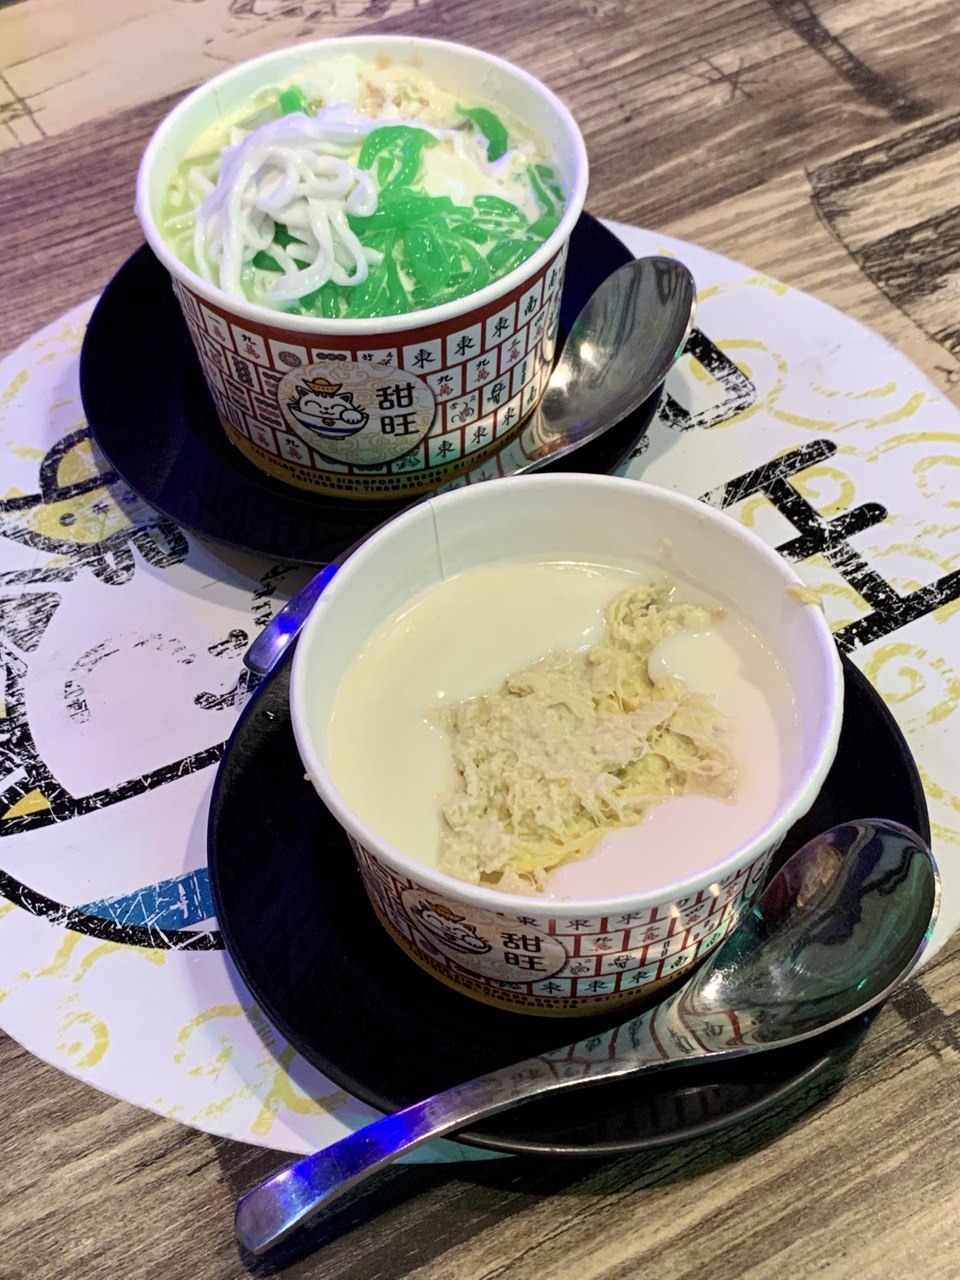 A bowl of Chendol dessert and a bowl of Mao Shan Wang Durian Mousse